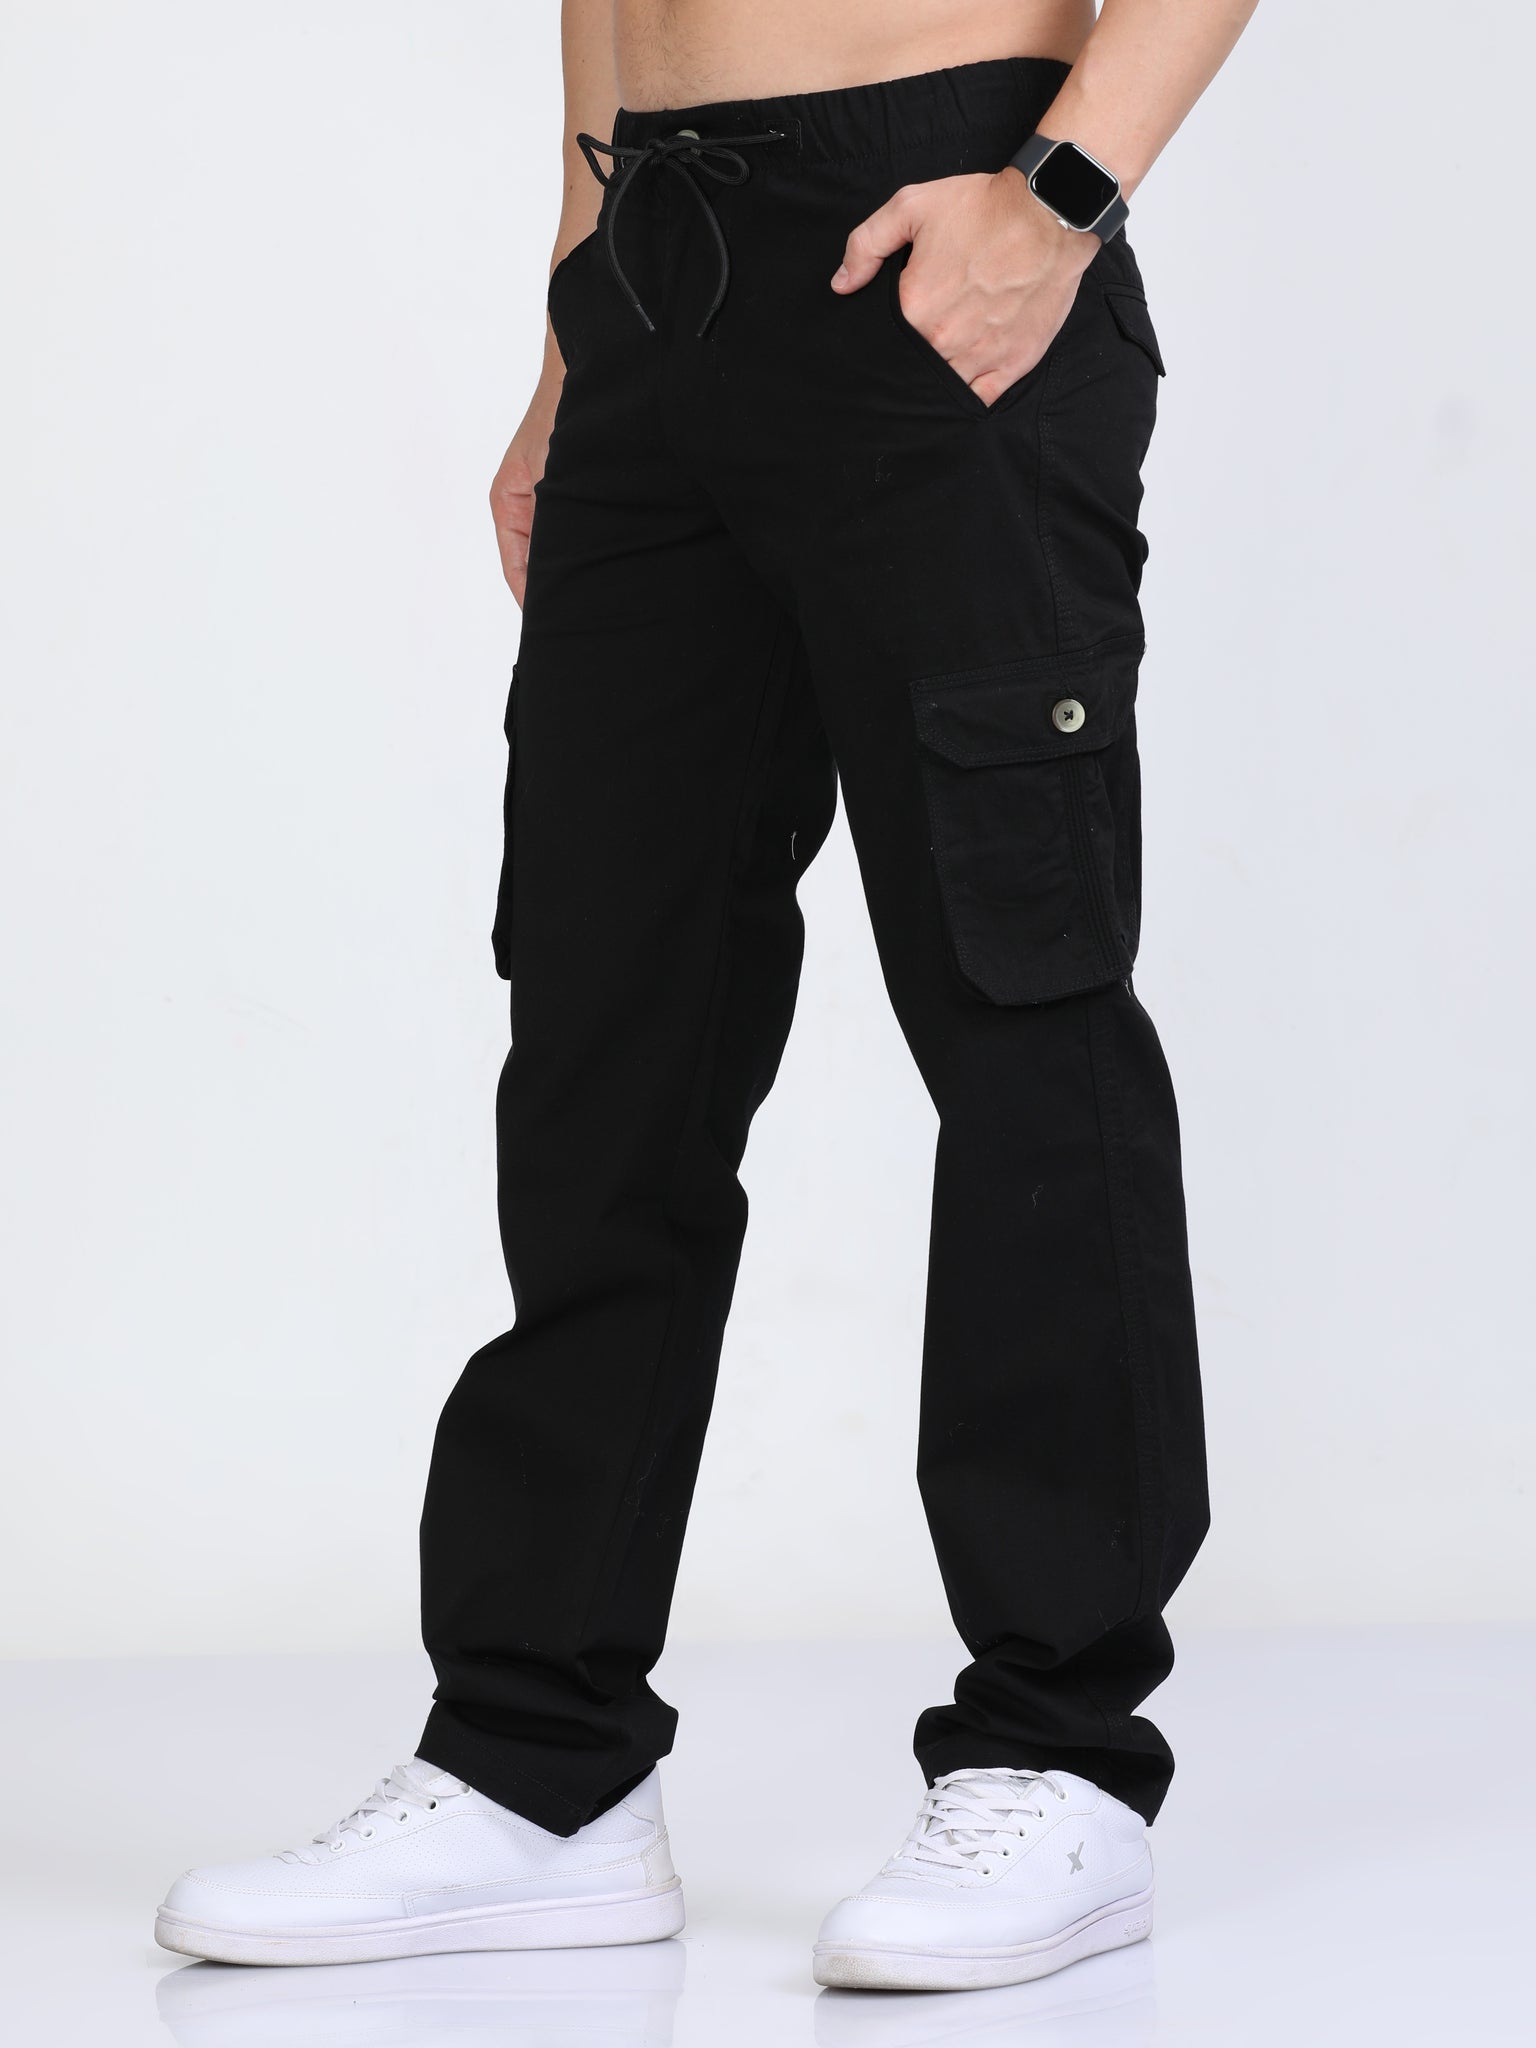 Buy Black Jeans for Men by SNITCH Online | Ajio.com